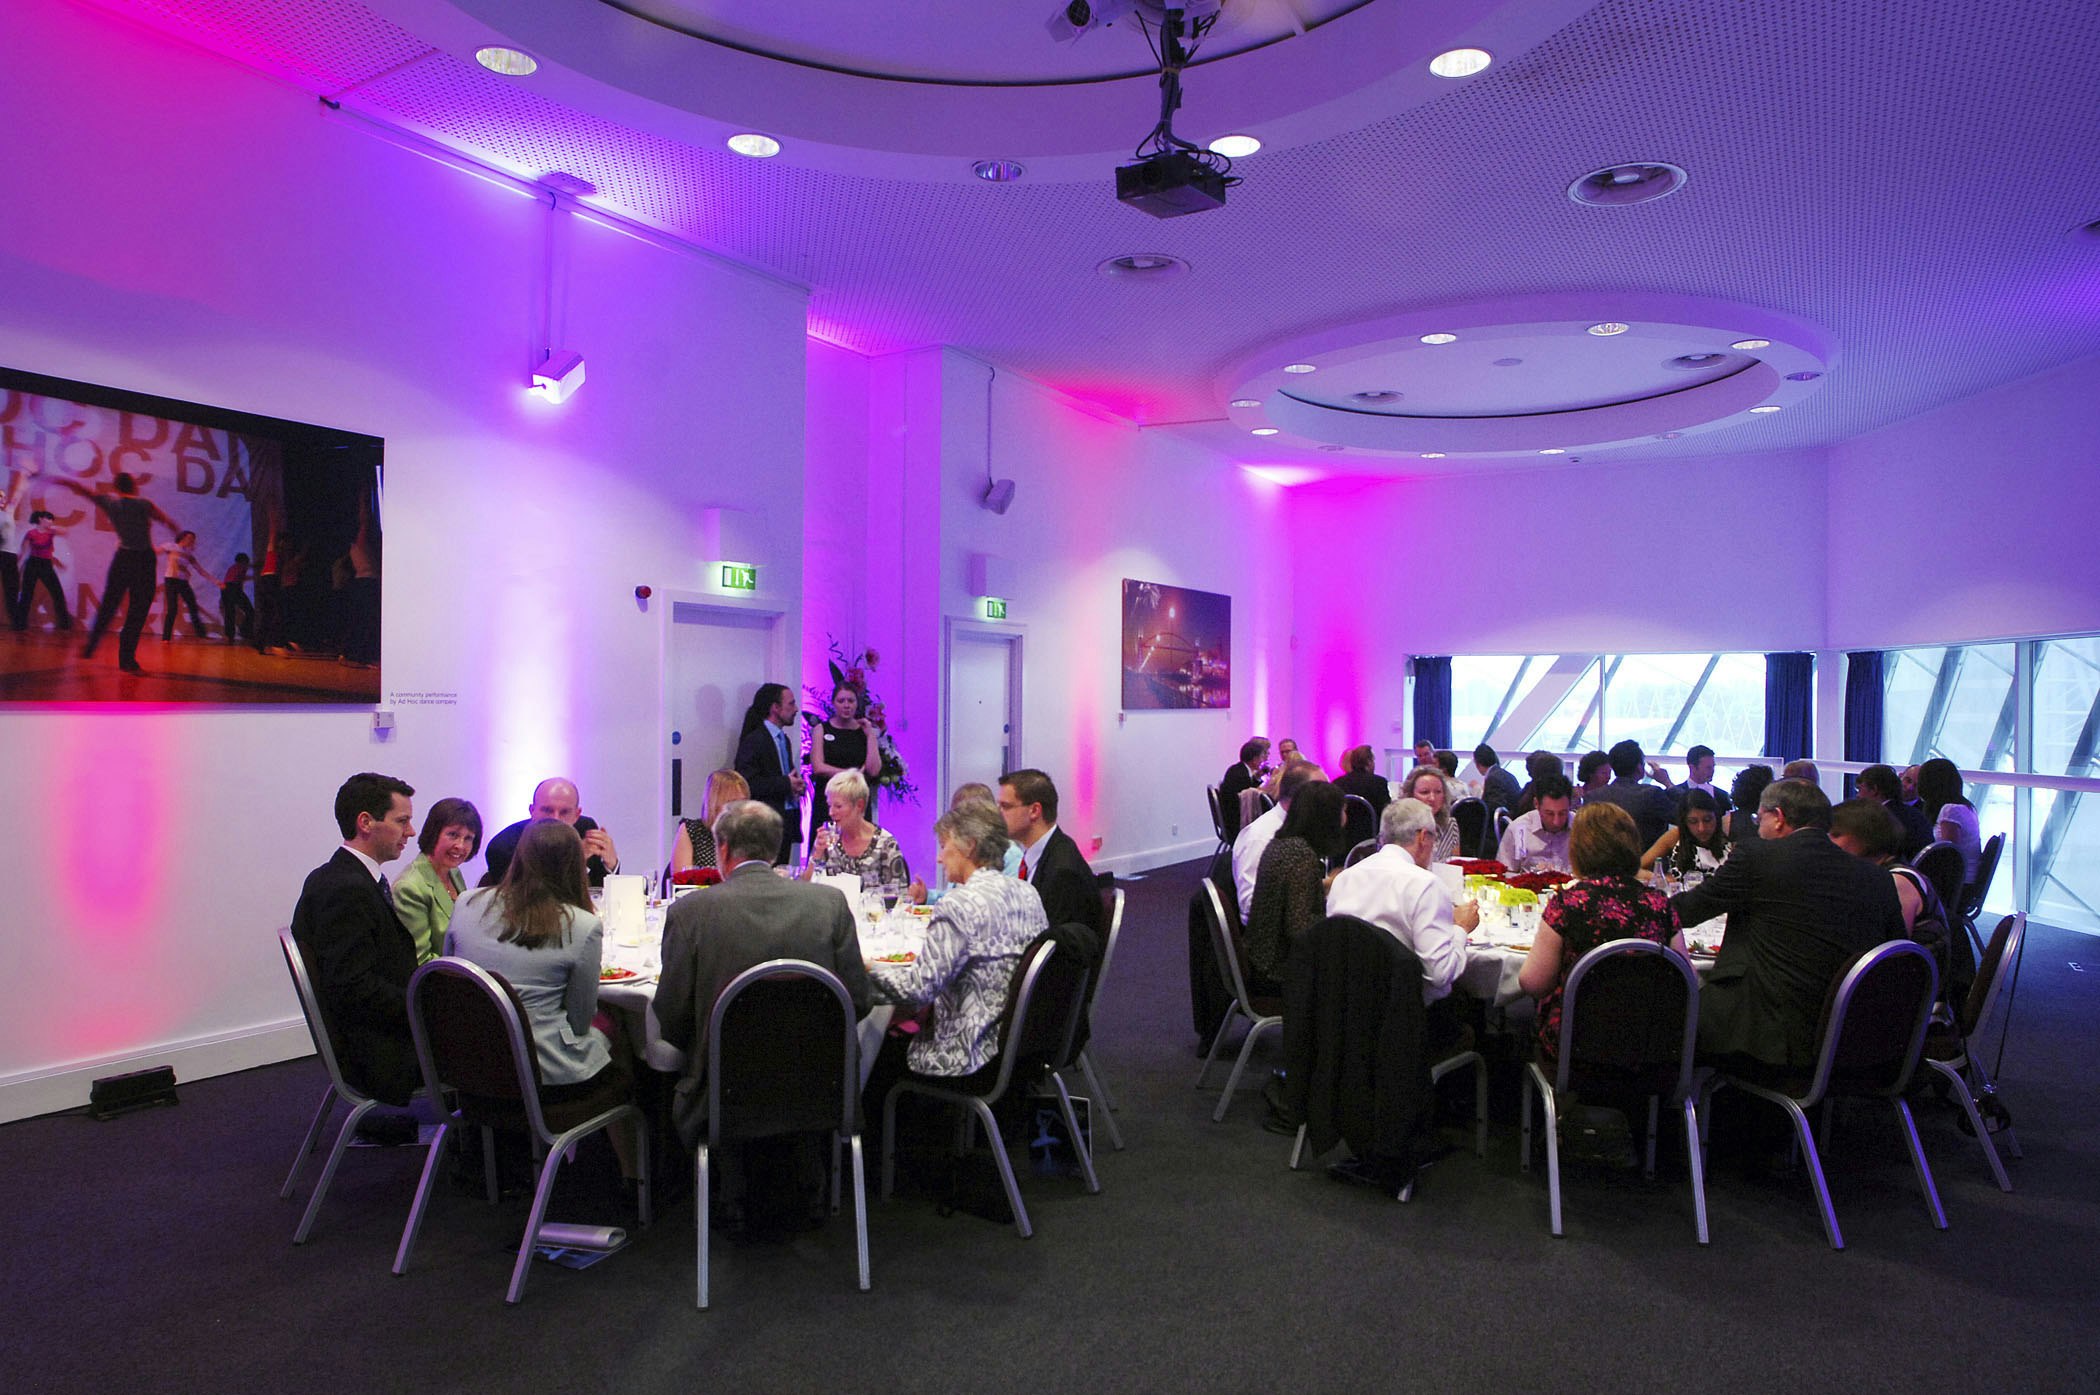 Bar Mitzvah Venues in Manchester - The Lowry